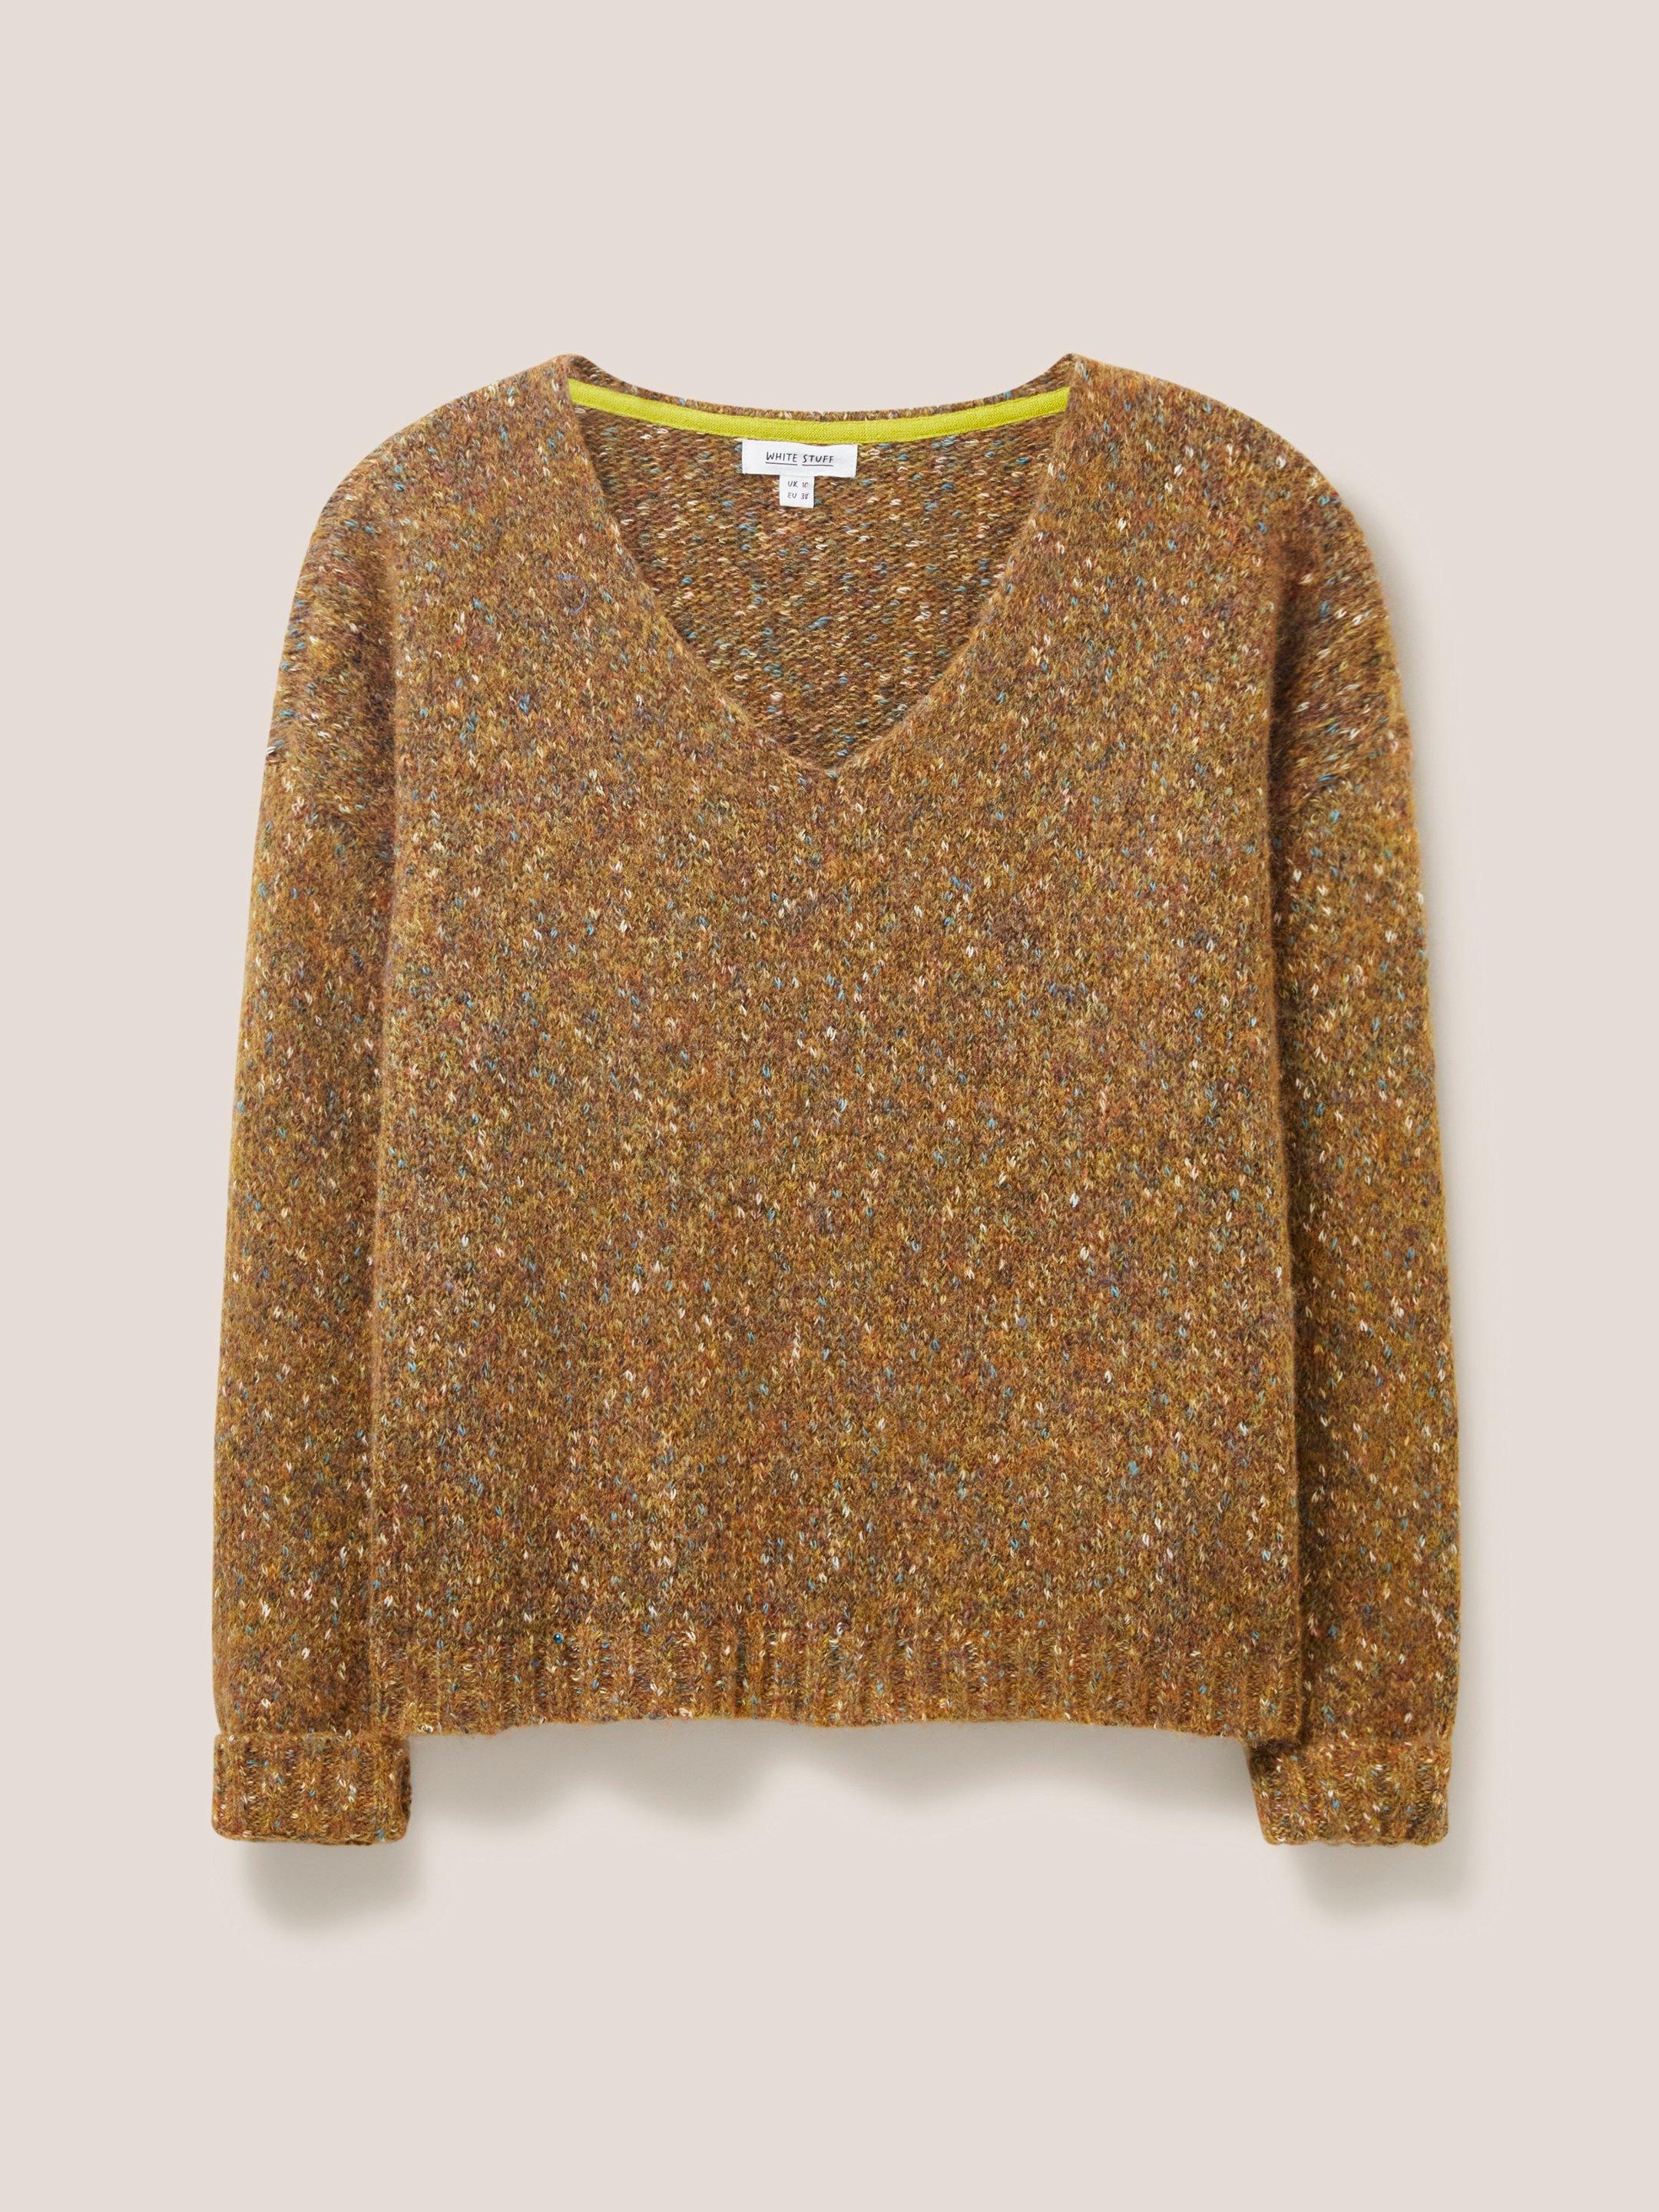 TEXTURE JUMPER in BROWN MLT - FLAT FRONT